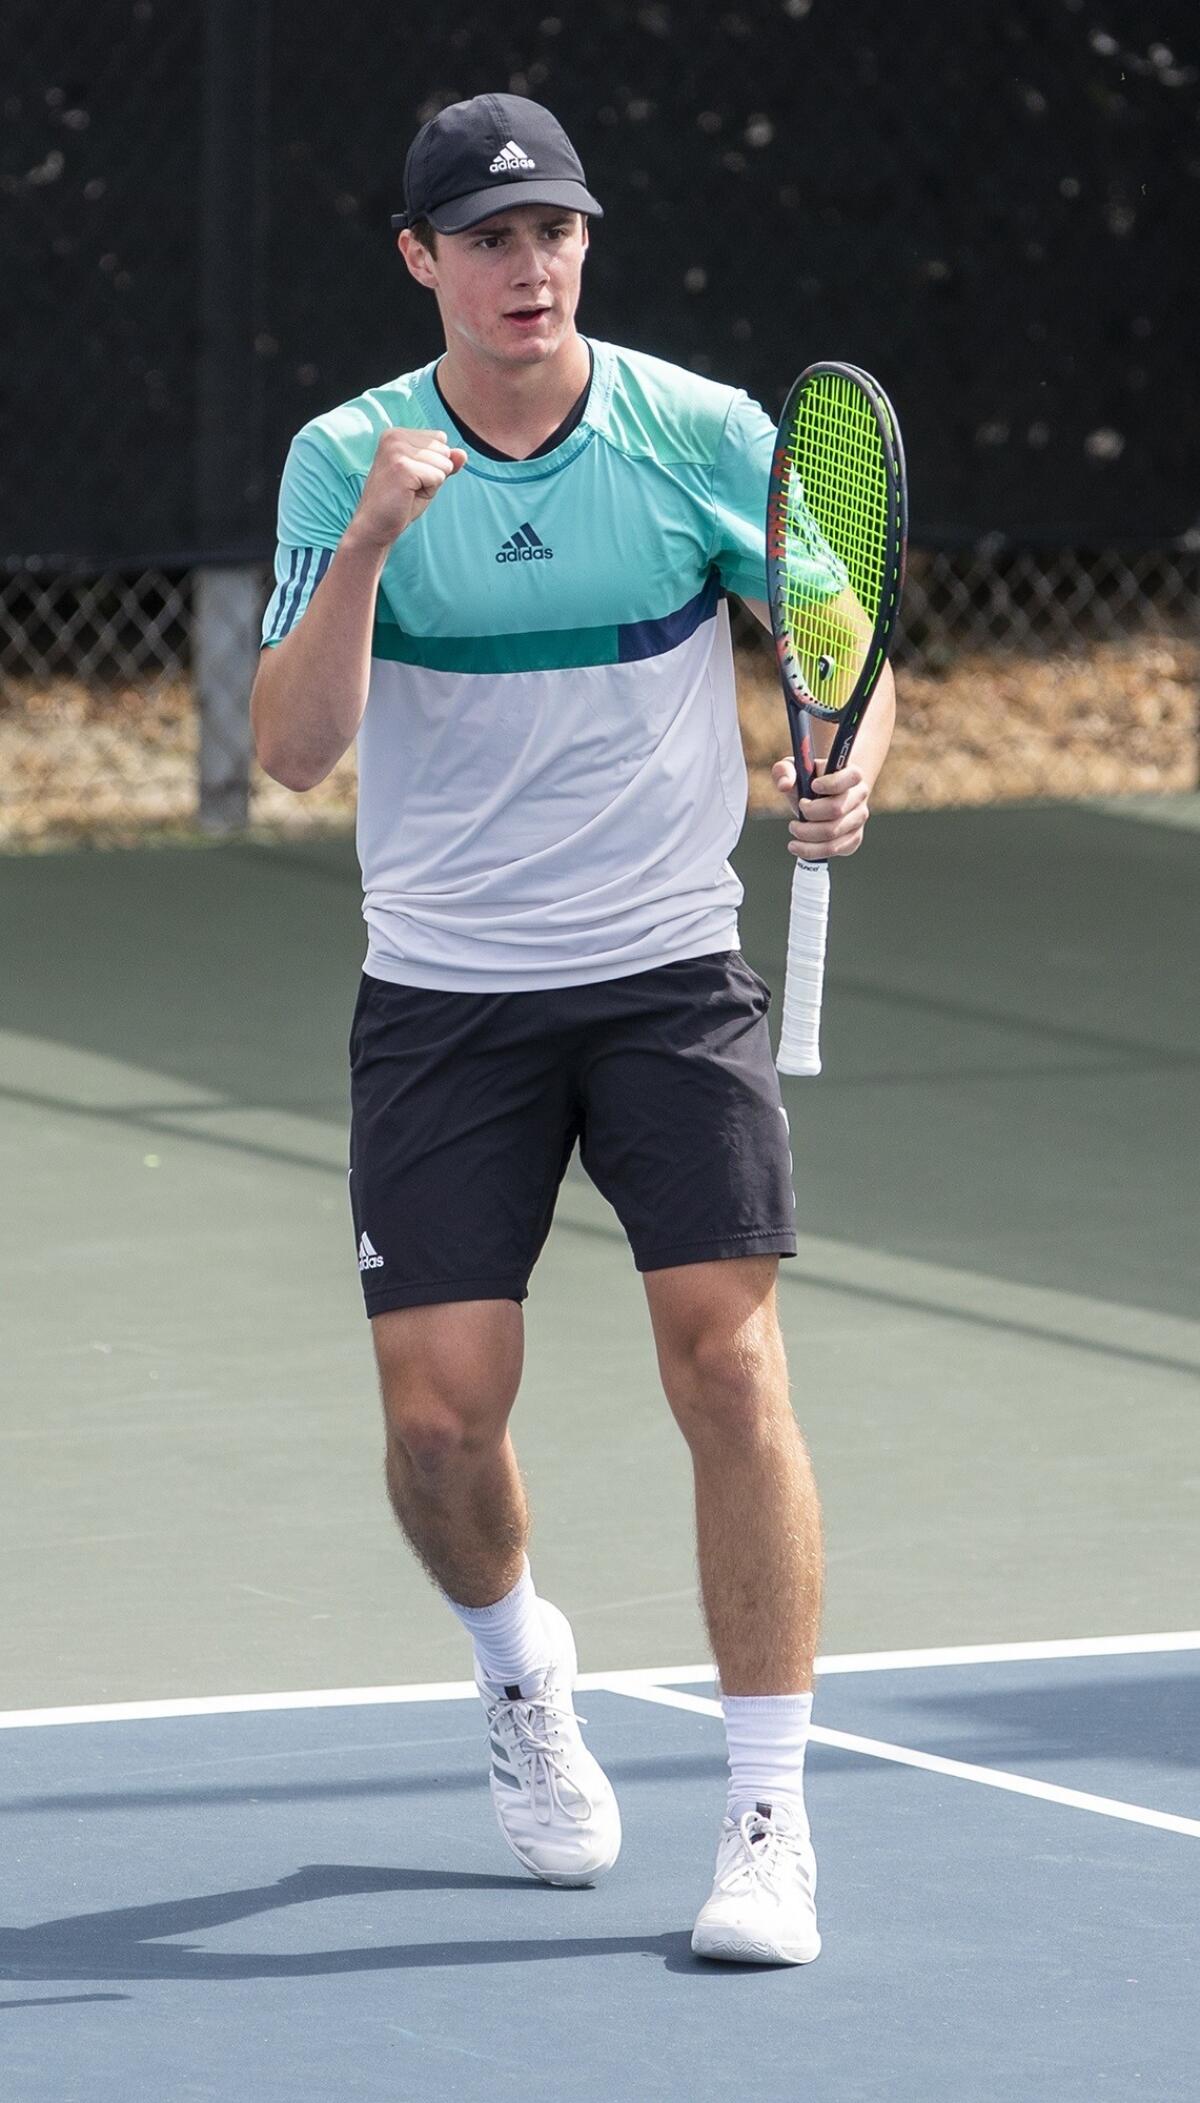 Daniel Day of Laguna Beach pumps his fist in the boys' 18-and-under round of 64 singles match at the USTA Southern California Junior Sectional Championships in Fountain Valley on Wednesday.